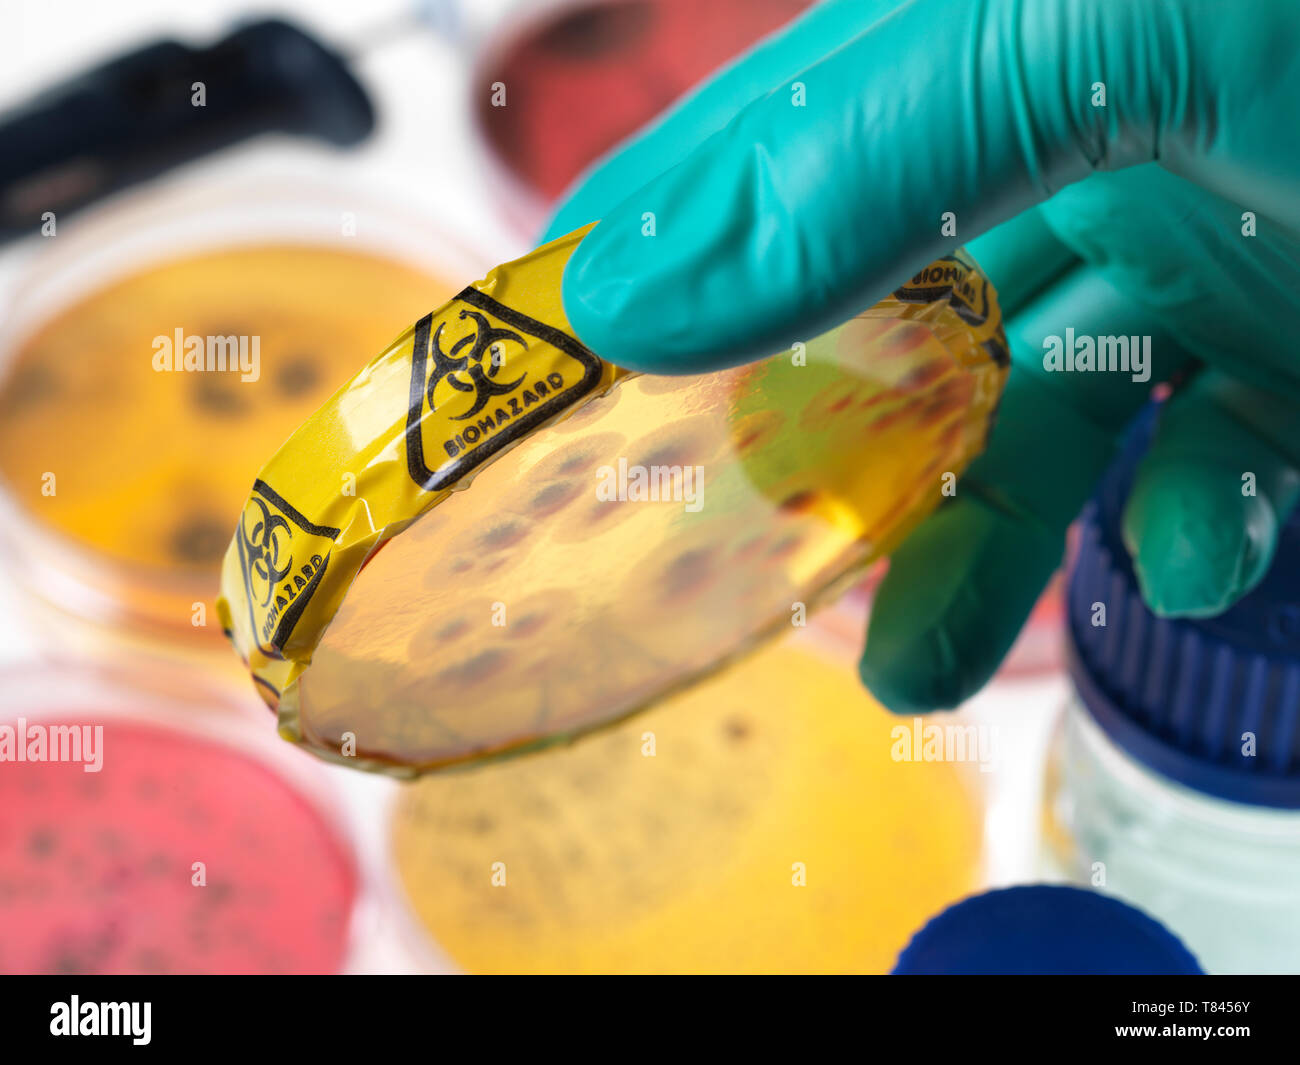 Microbiology Experiment, Scientist viewing microorganisms in bacterial cultures growing in petri dishes in the laboratory, close up of hand Stock Photo